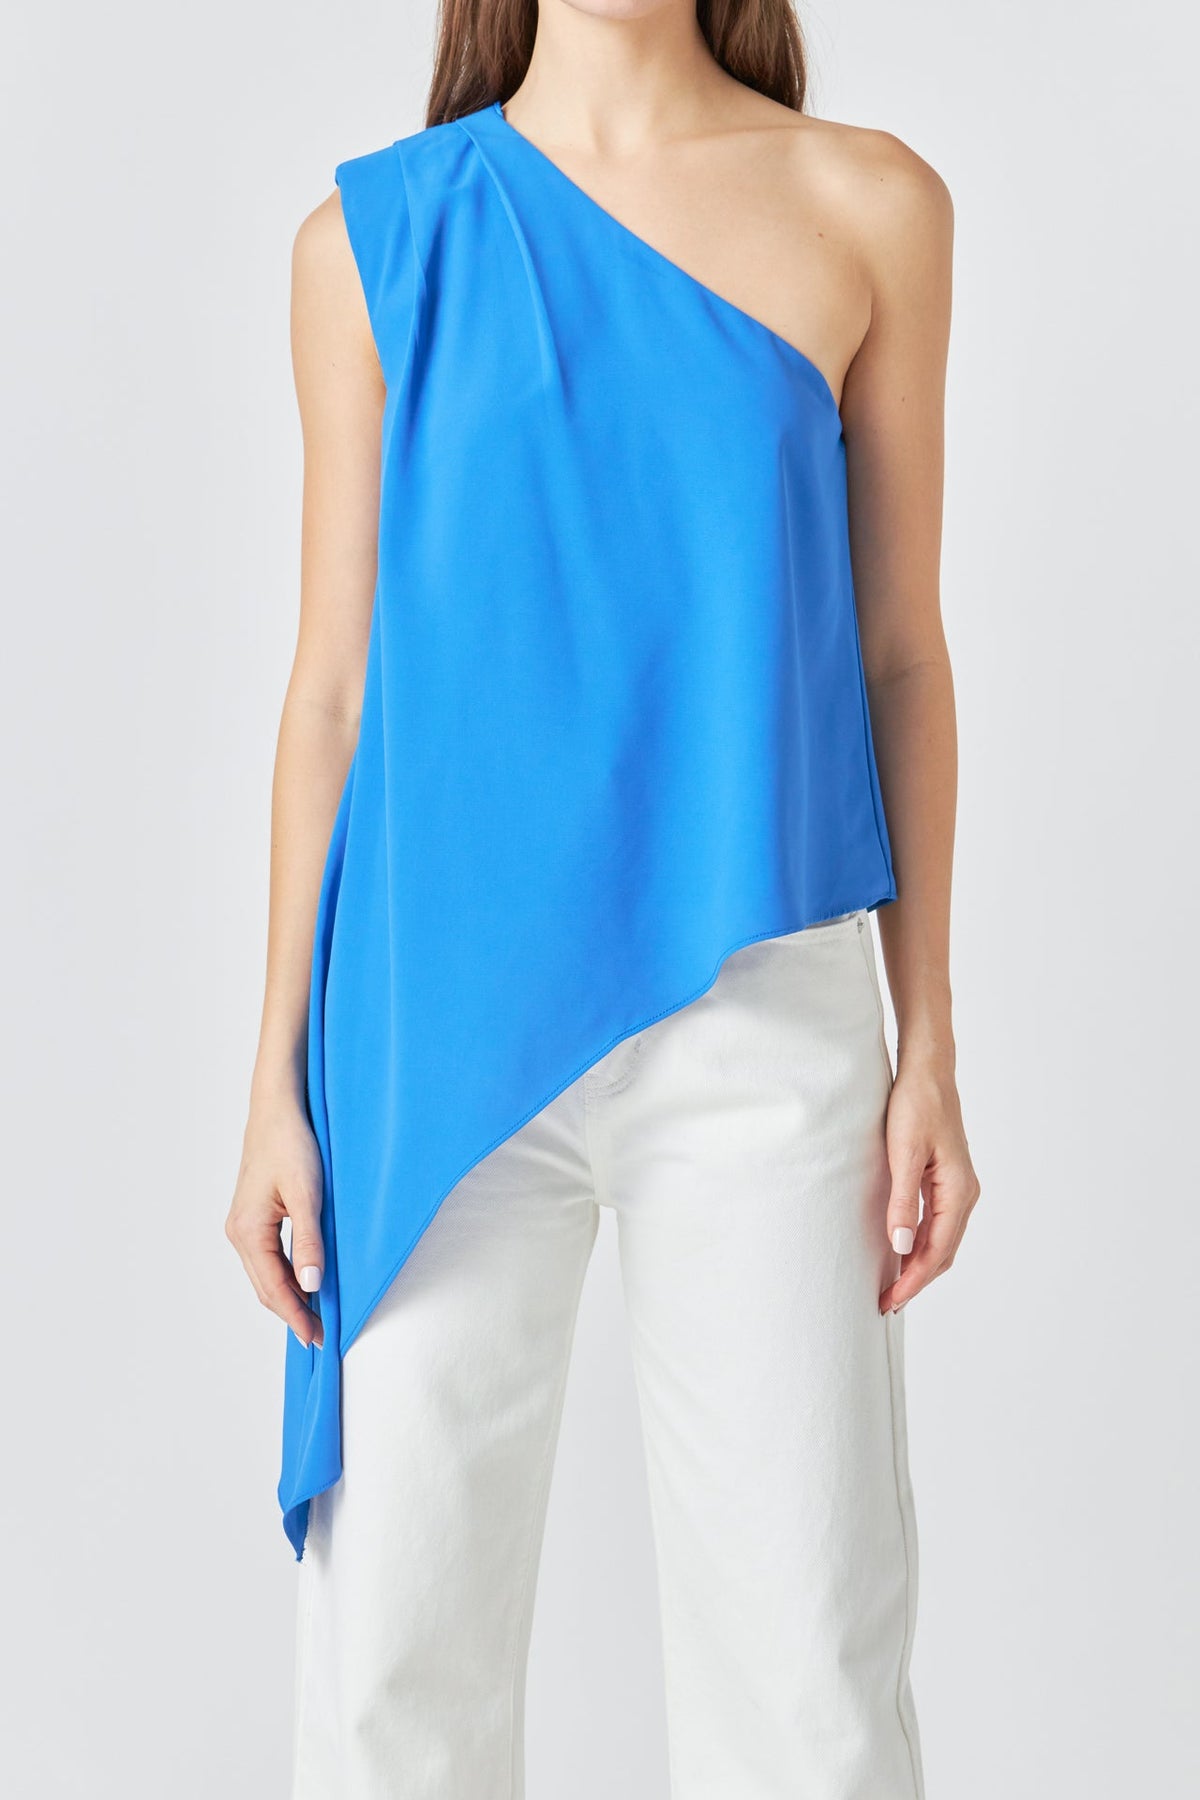 ENDLESS ROSE - One Shoulder Waterfall Top - TOPS available at Objectrare